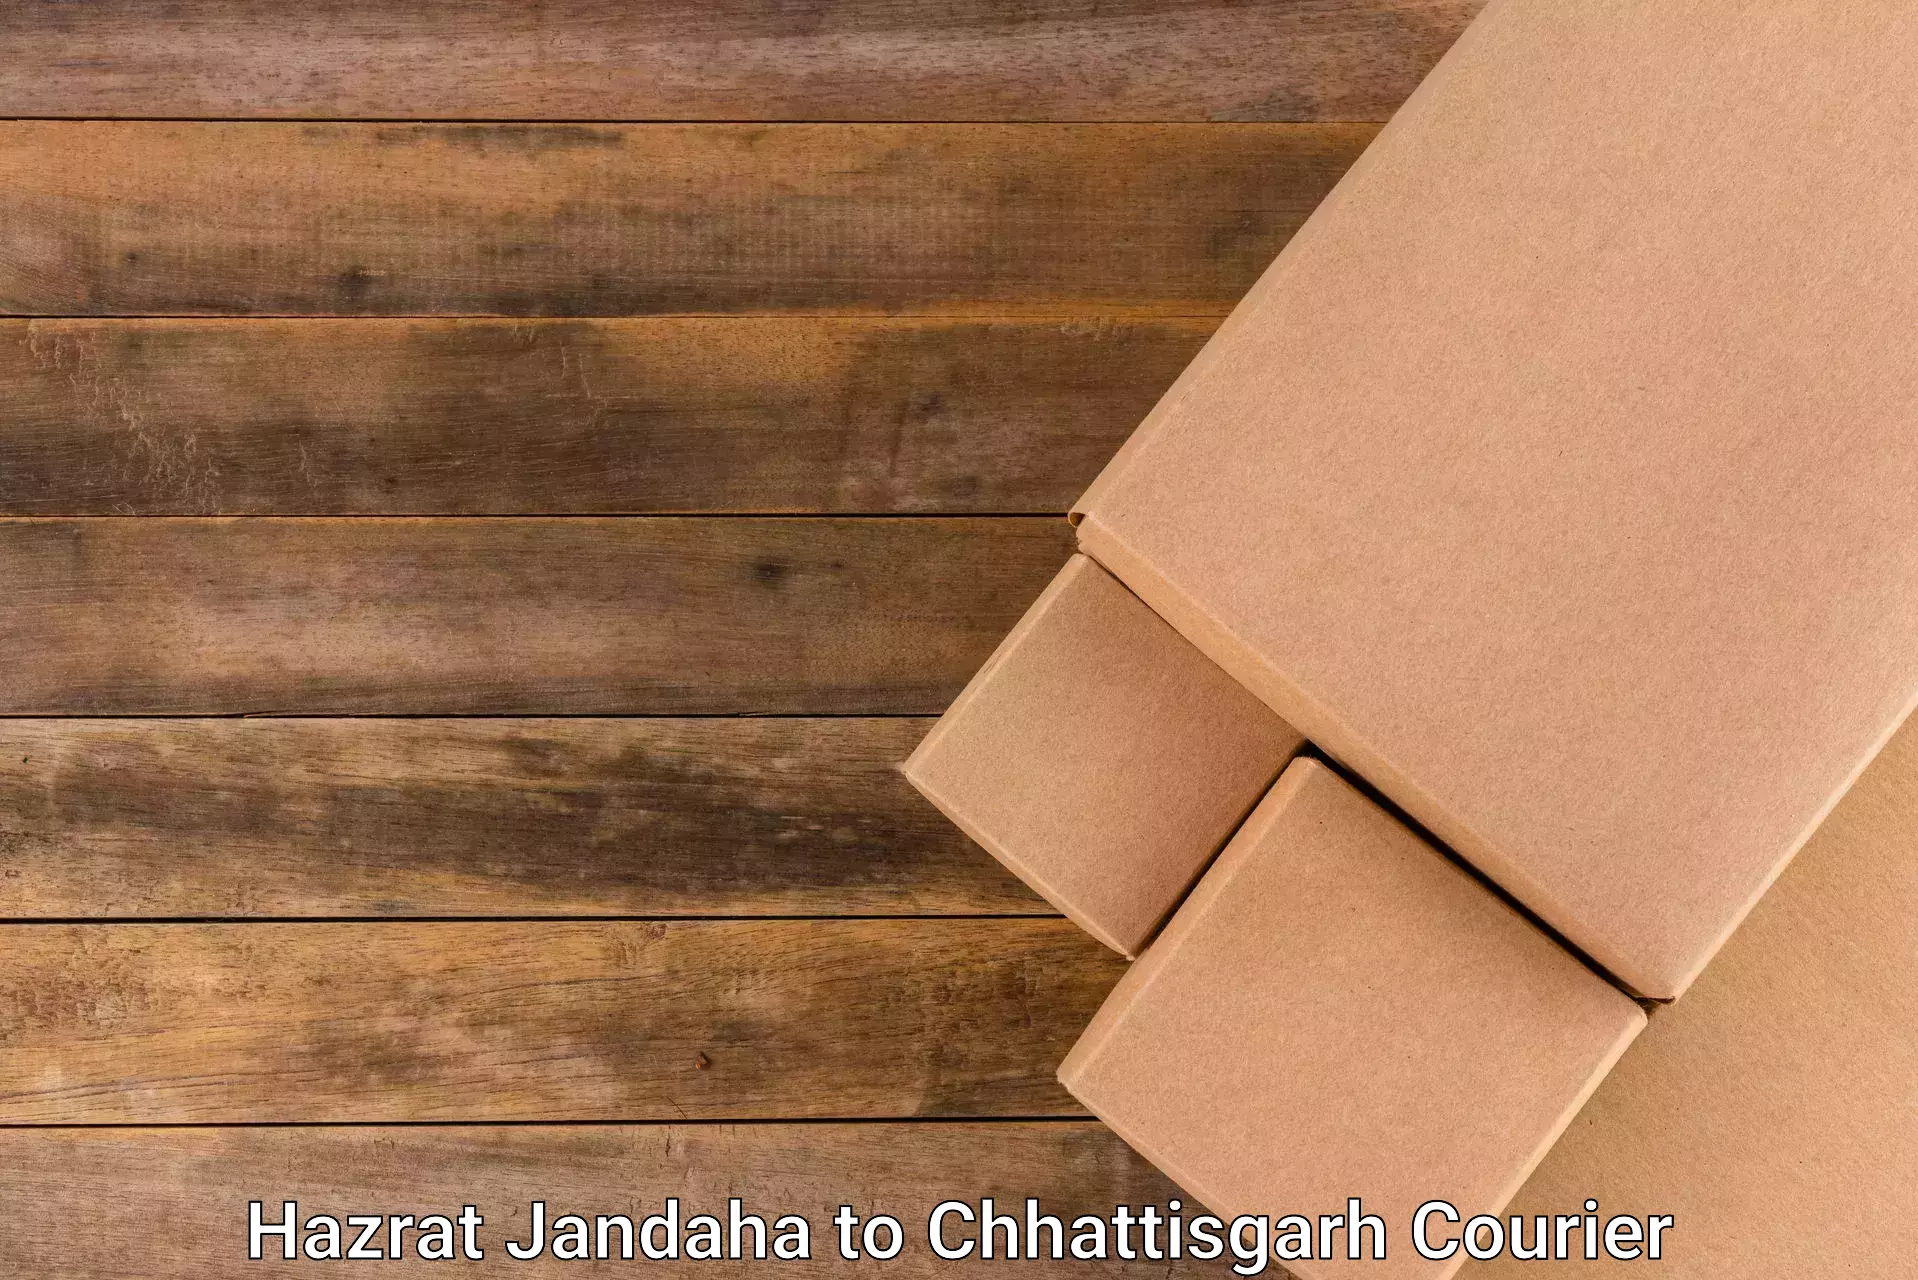 Professional parcel services in Hazrat Jandaha to bagbahra